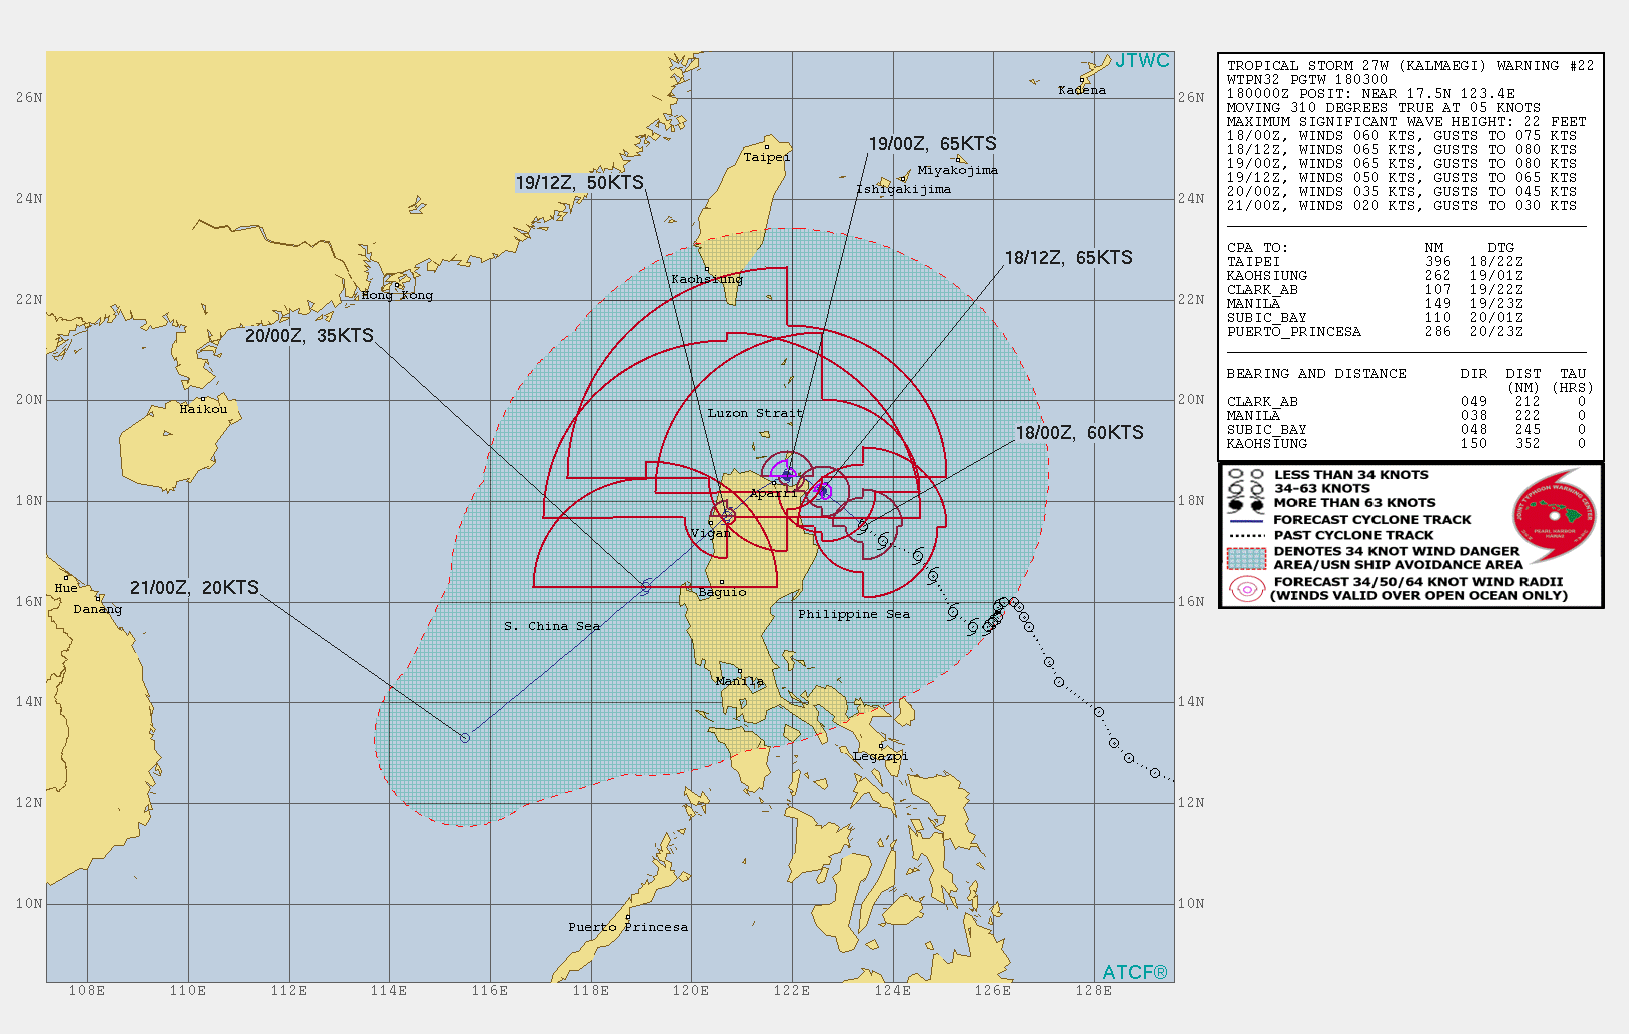 Kalmaegi now almost a typhoon and bearing down on Northeast Luzon